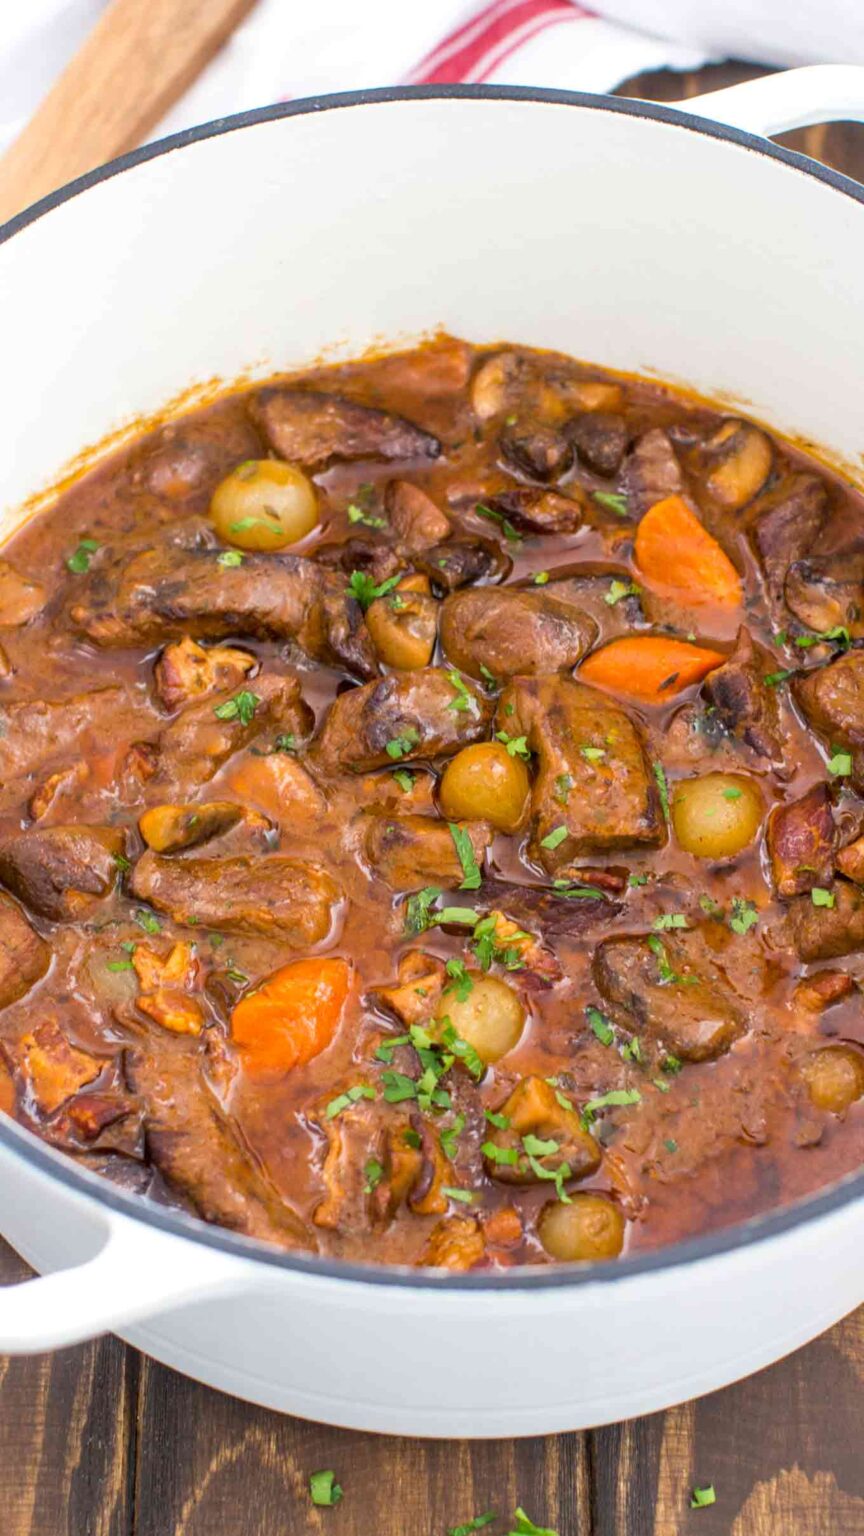 Beef Bourguignon Recipe [Video] - Sweet and Savory Meals